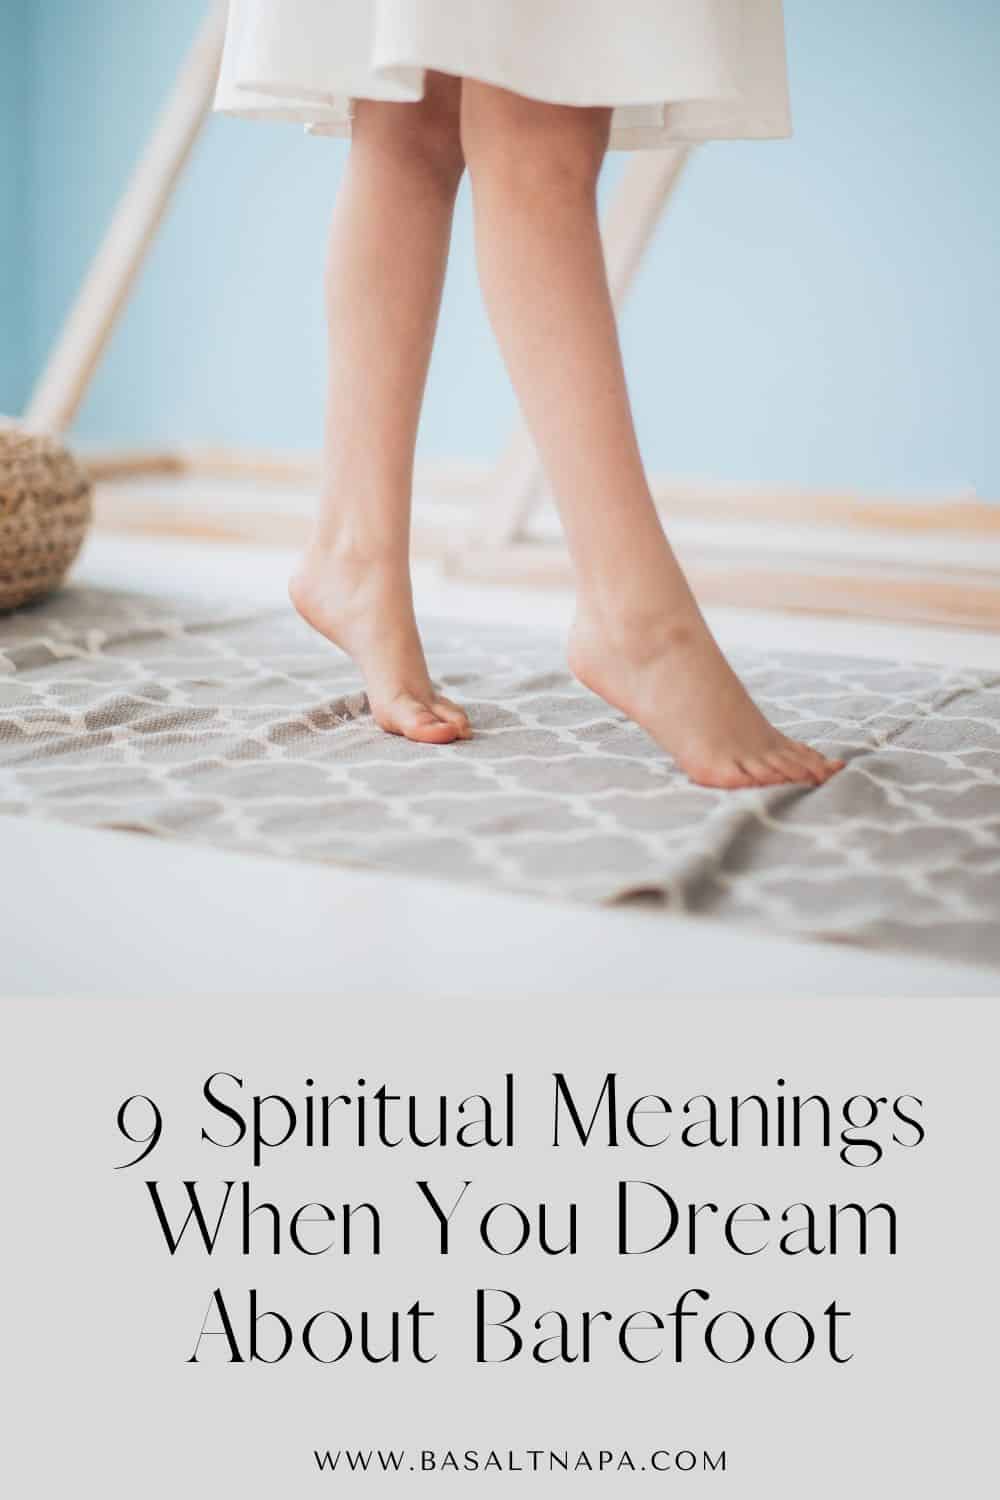 Barefoot dreams meaning